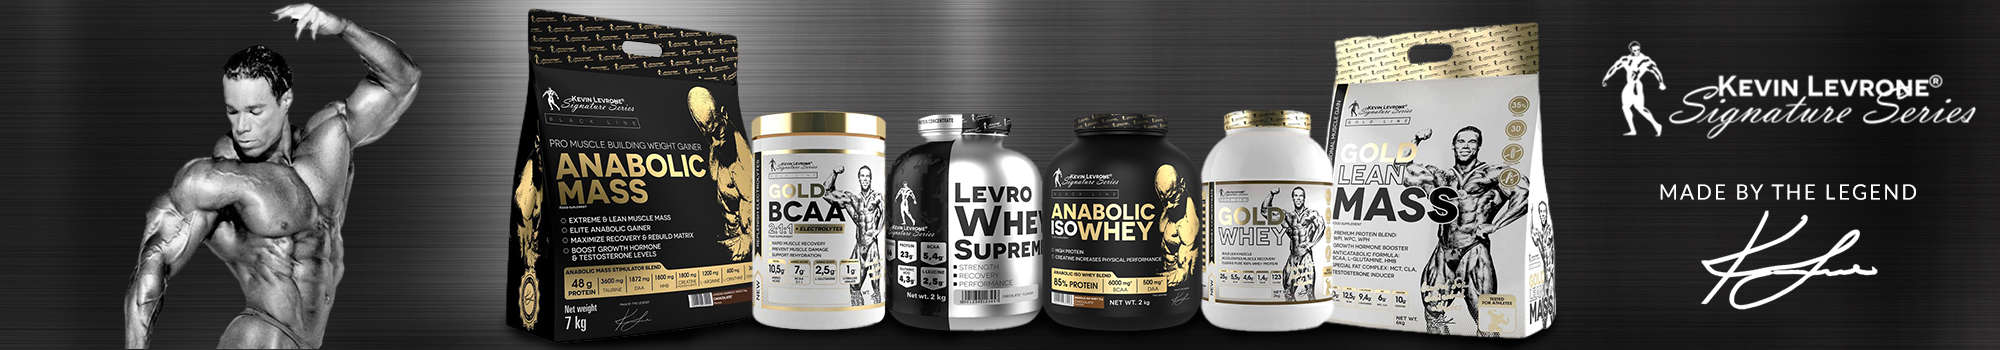 best kevin levrone protein supplements online in India